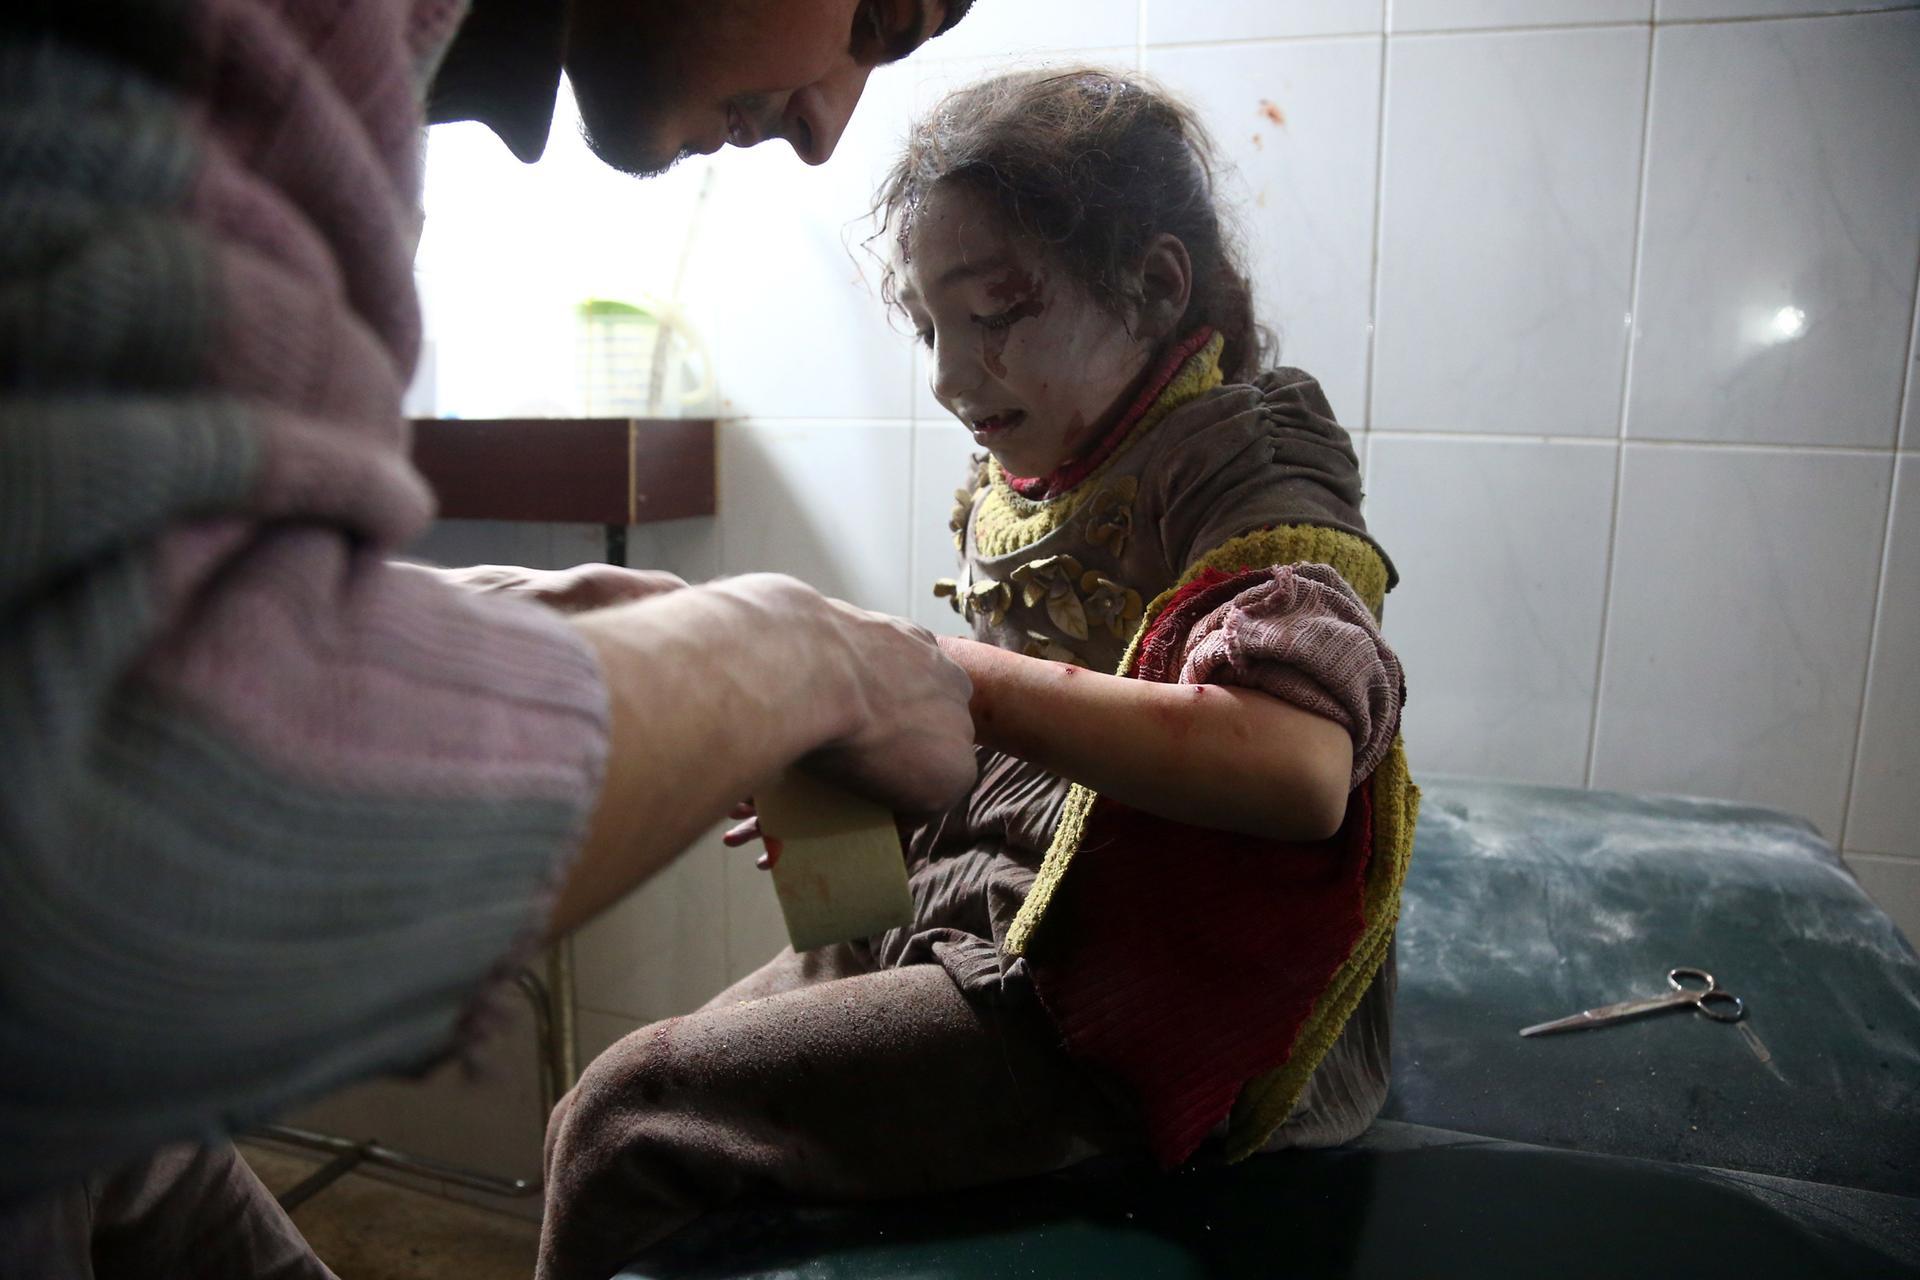 A child receives treatment at a makeshift hospital following Syrian air force strikes in the town of Hamouria in the Eastern Ghouta region on February 8, 2018. Abdulmonam Eassa / AFP